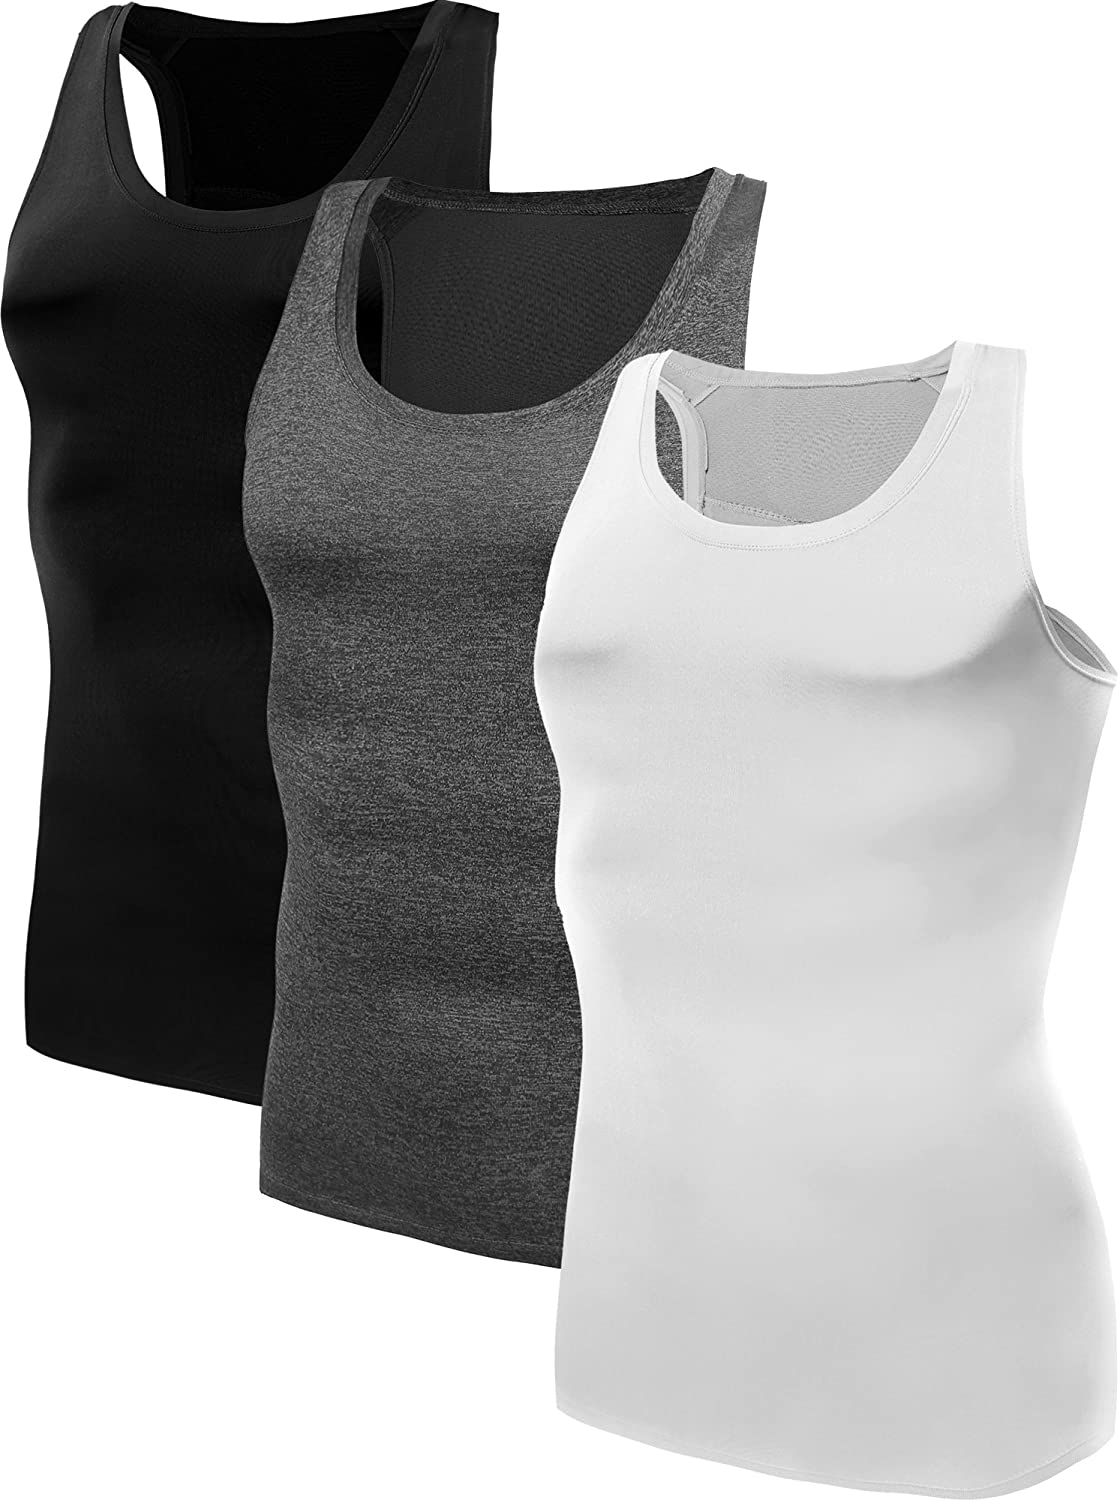 NELEUS Womens Compression Base Layer Dry Fit Tank Top 3 Pack,Black